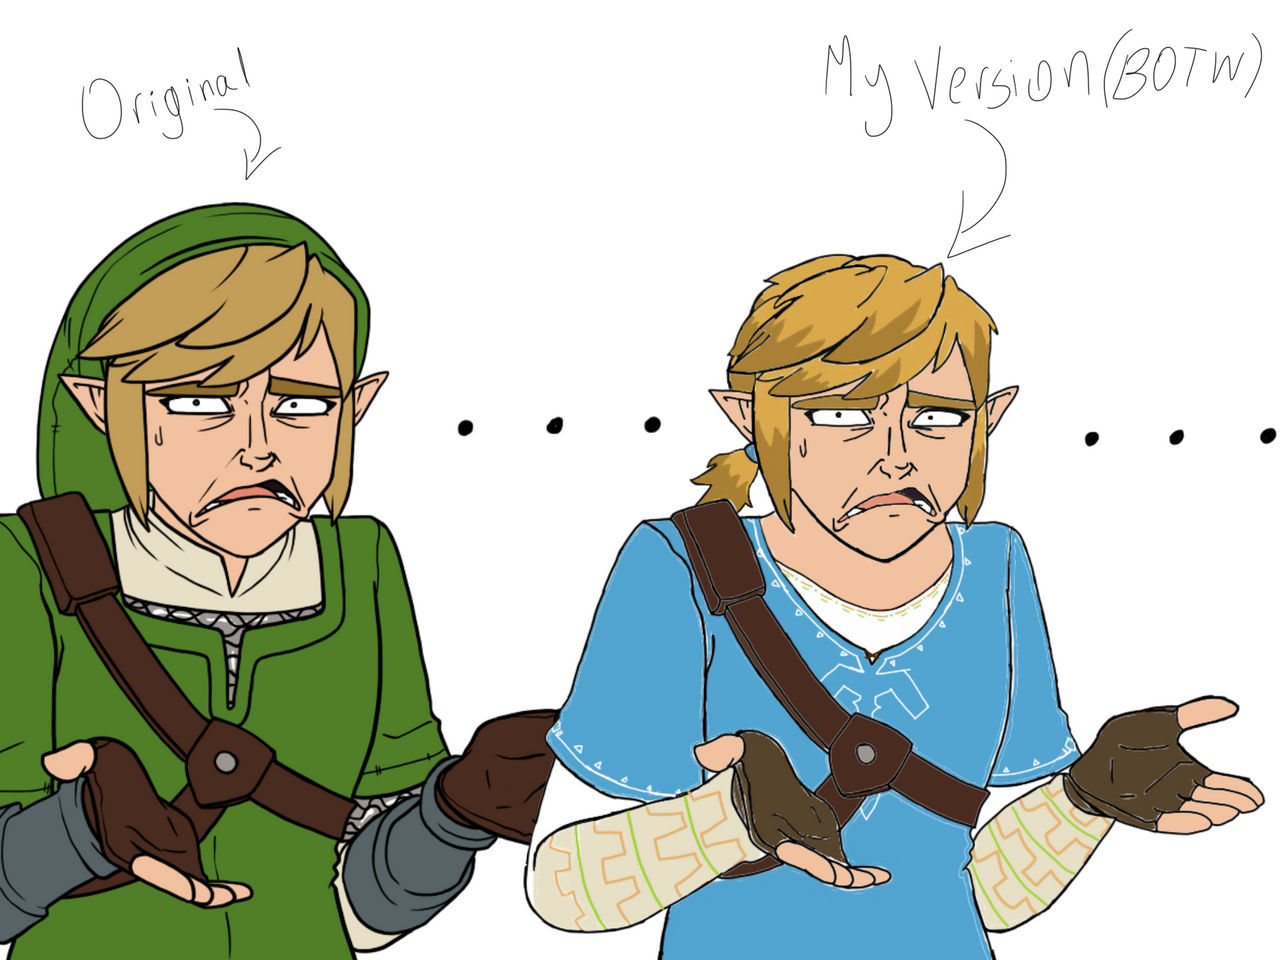 Link Confused Meme - Breath of the Wild by SHOWMEDATSKETCH on DeviantArt